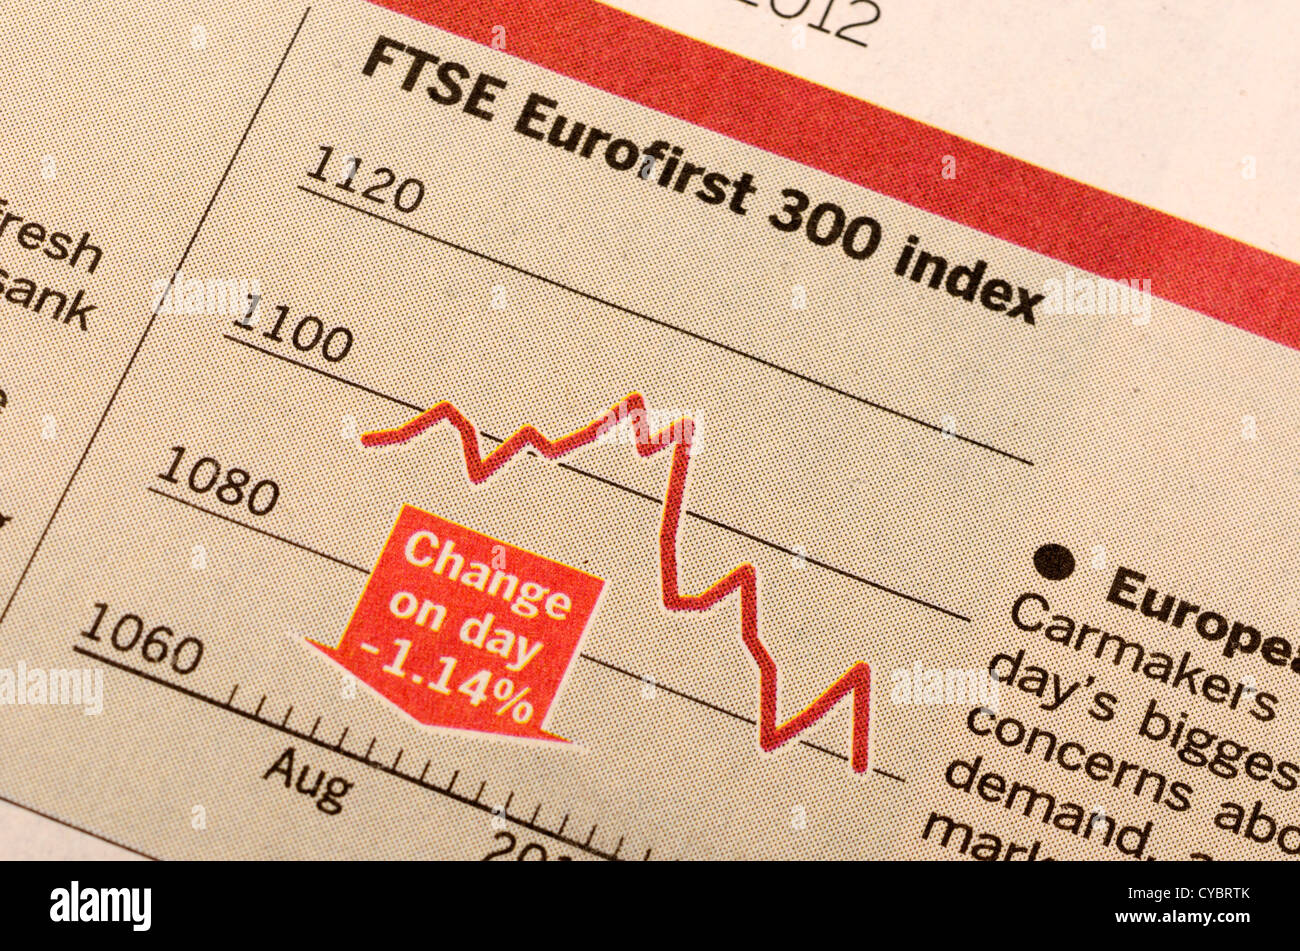 FTSE Eurofirst 300 Index graph in a newspaper Stock Photo